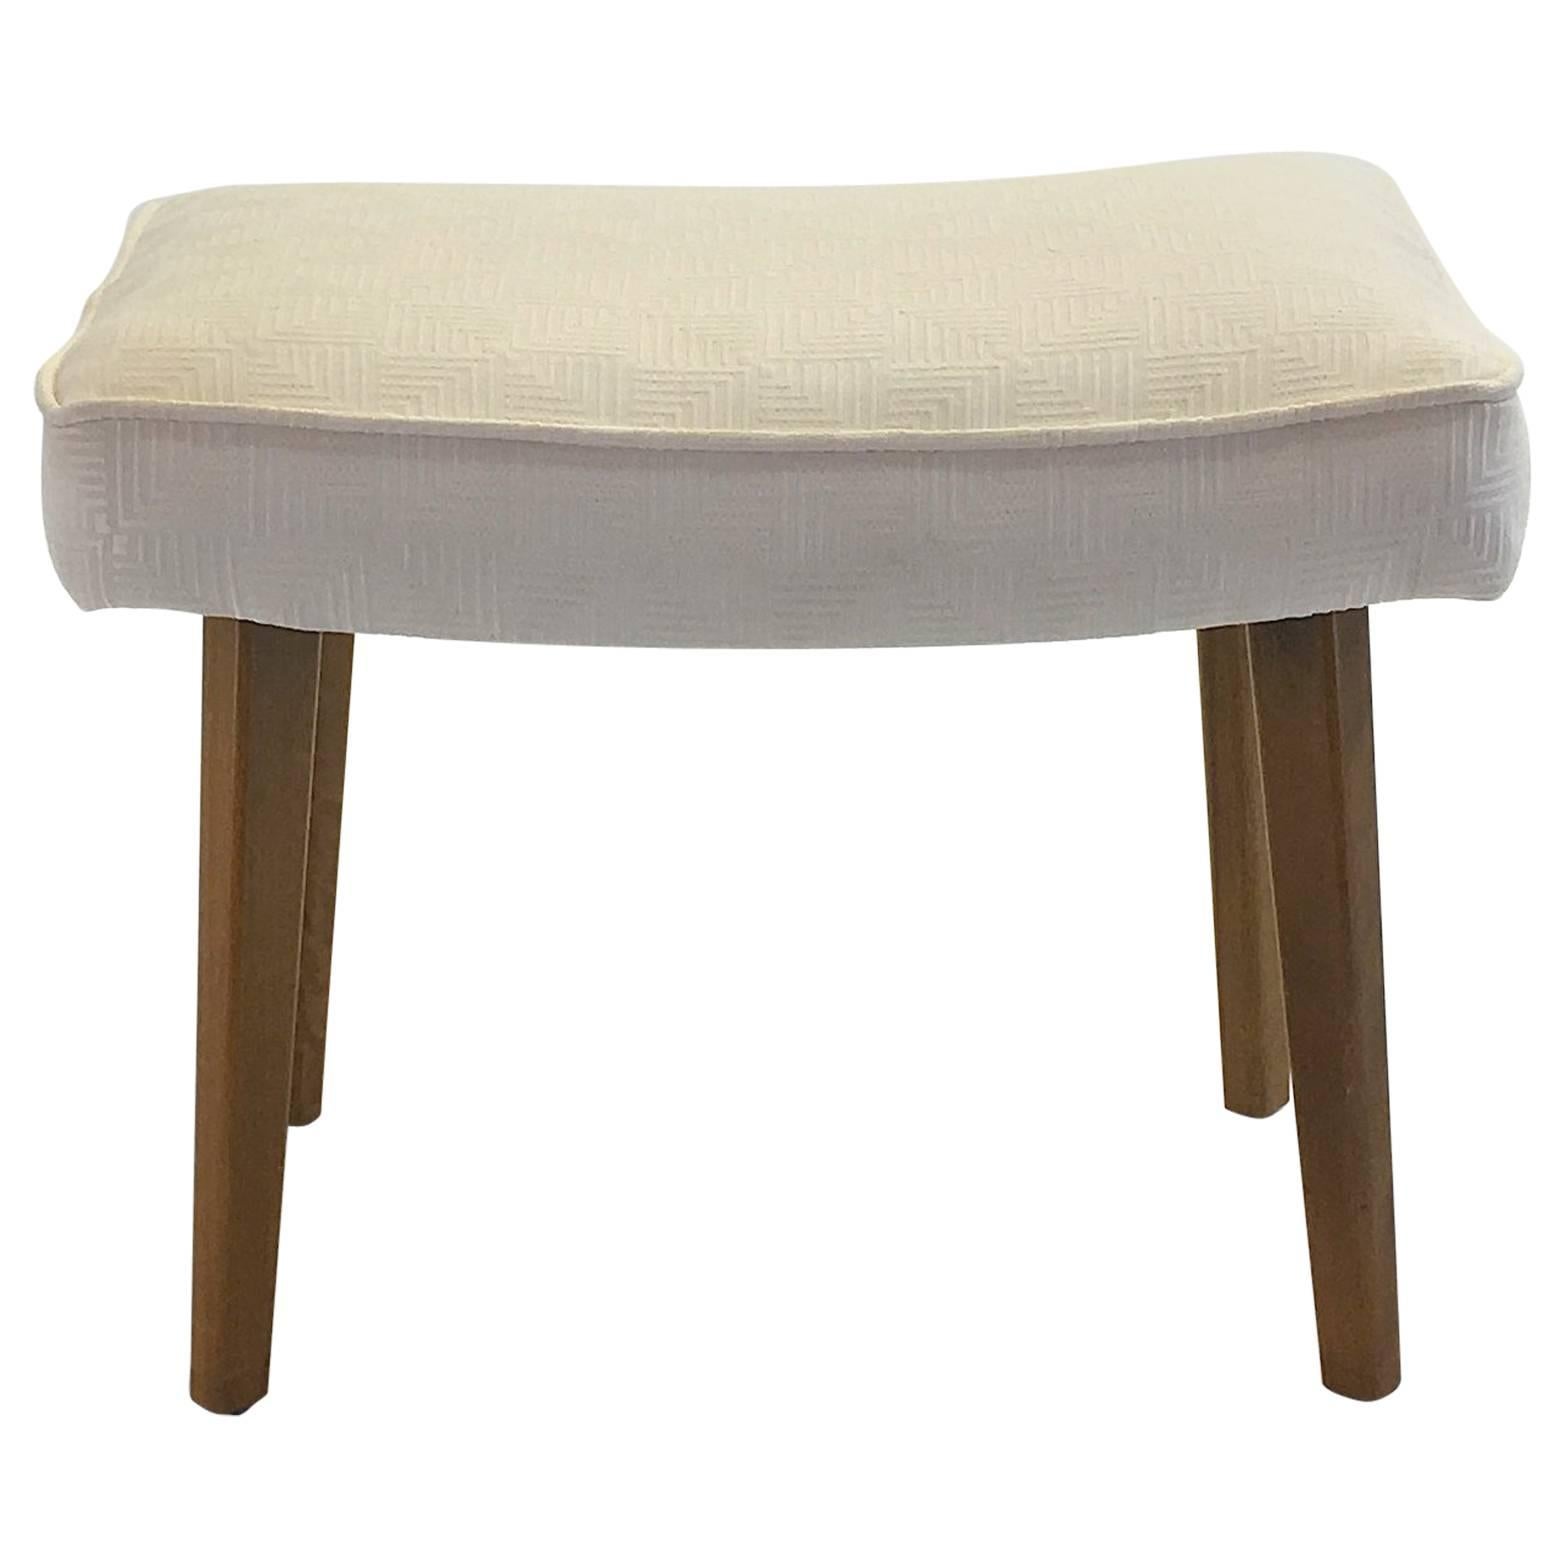 George Nelson Model 4698 Bench Stool